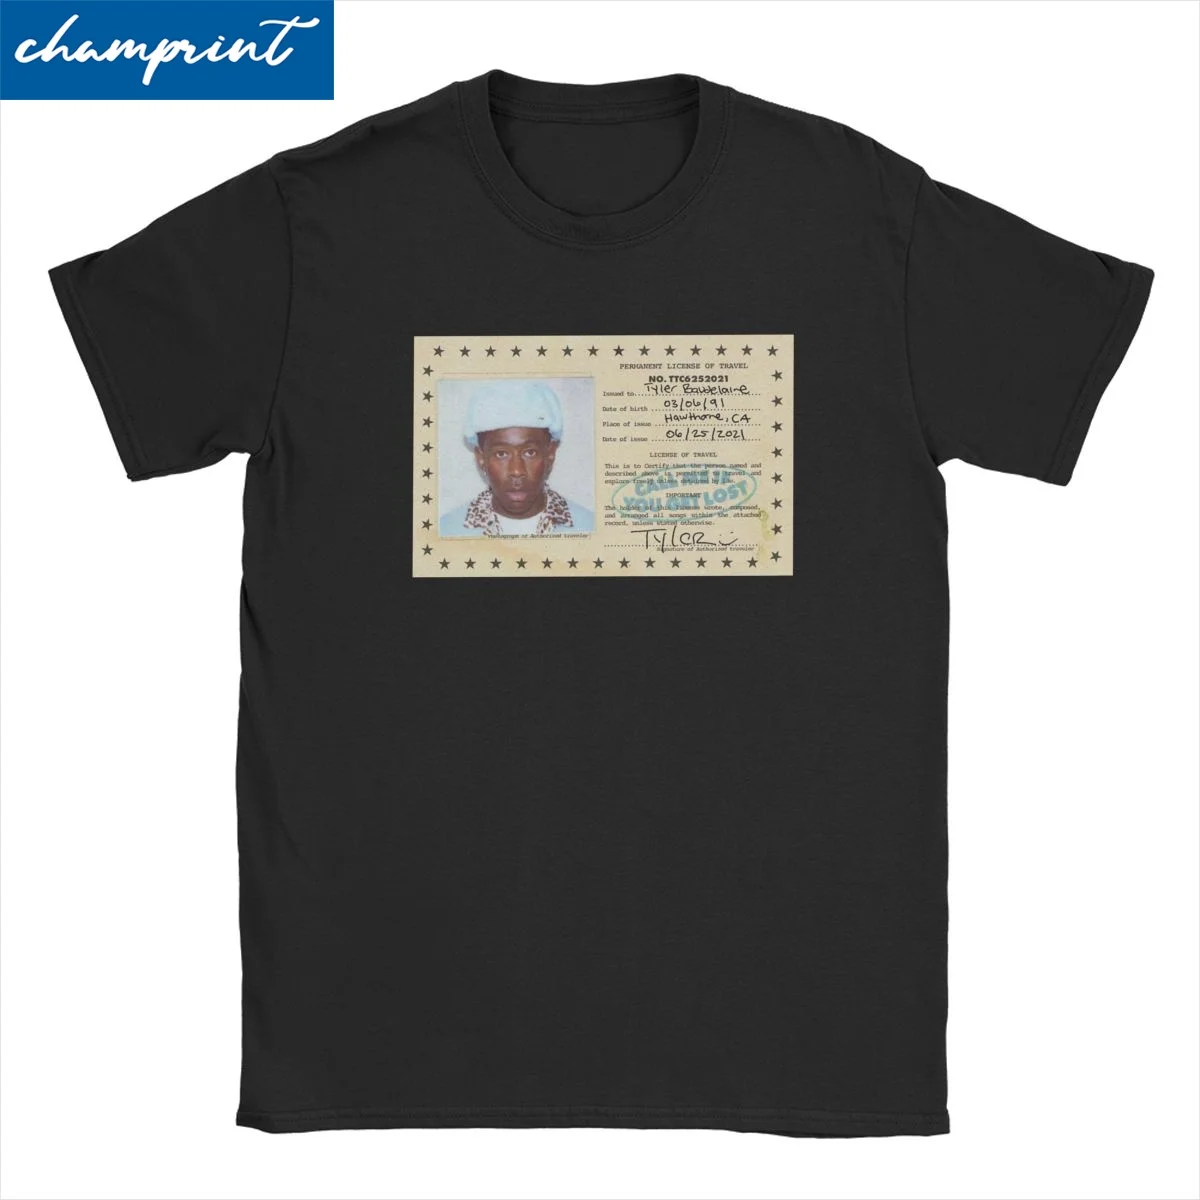 

Hipster Permanent License Of Travel T-Shirt Men Women's T Shirt Call Me if You Get Lost Tee Shirt Plus Size Clothing